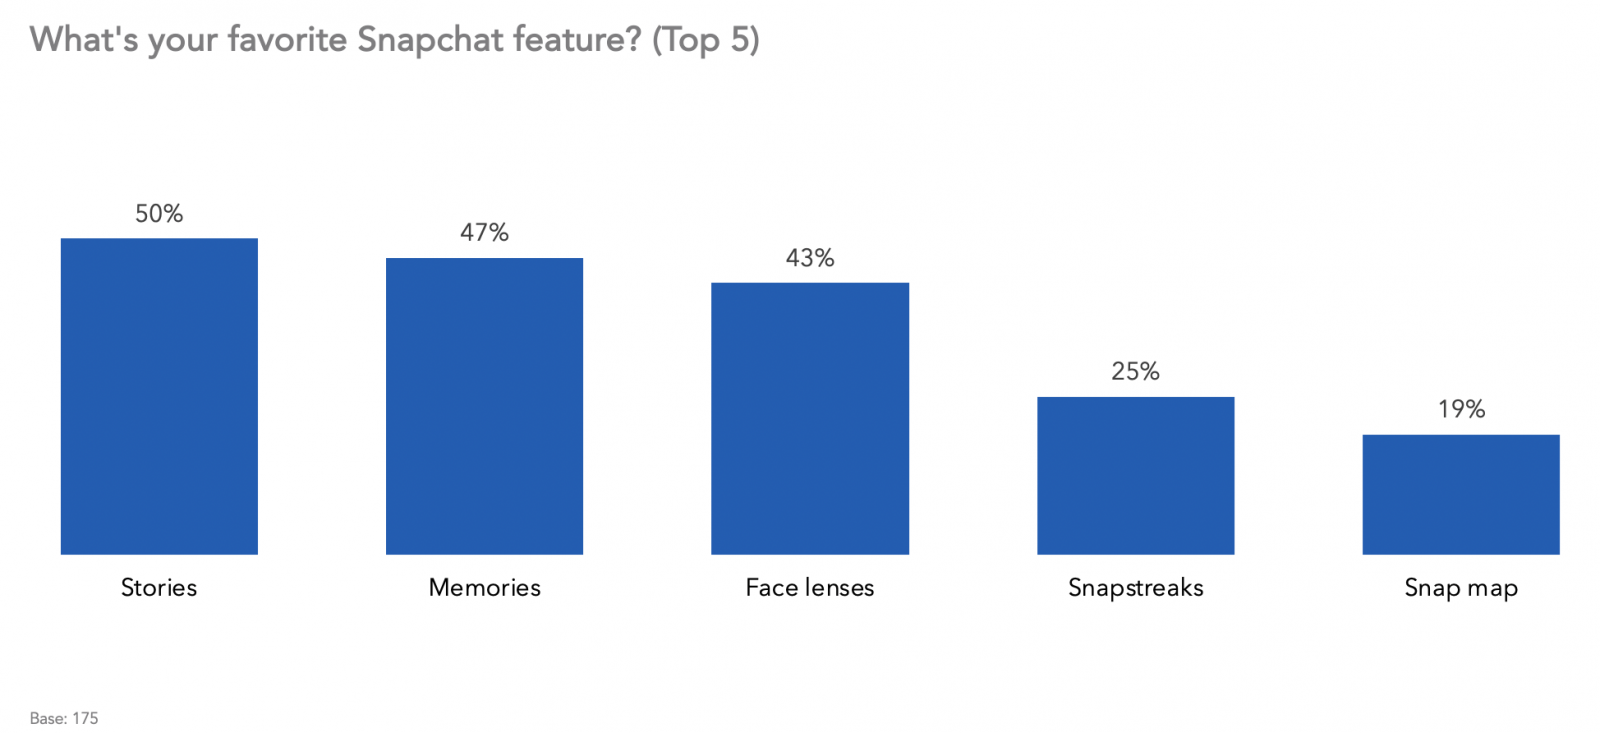 What's your favorite Snapchat feature?